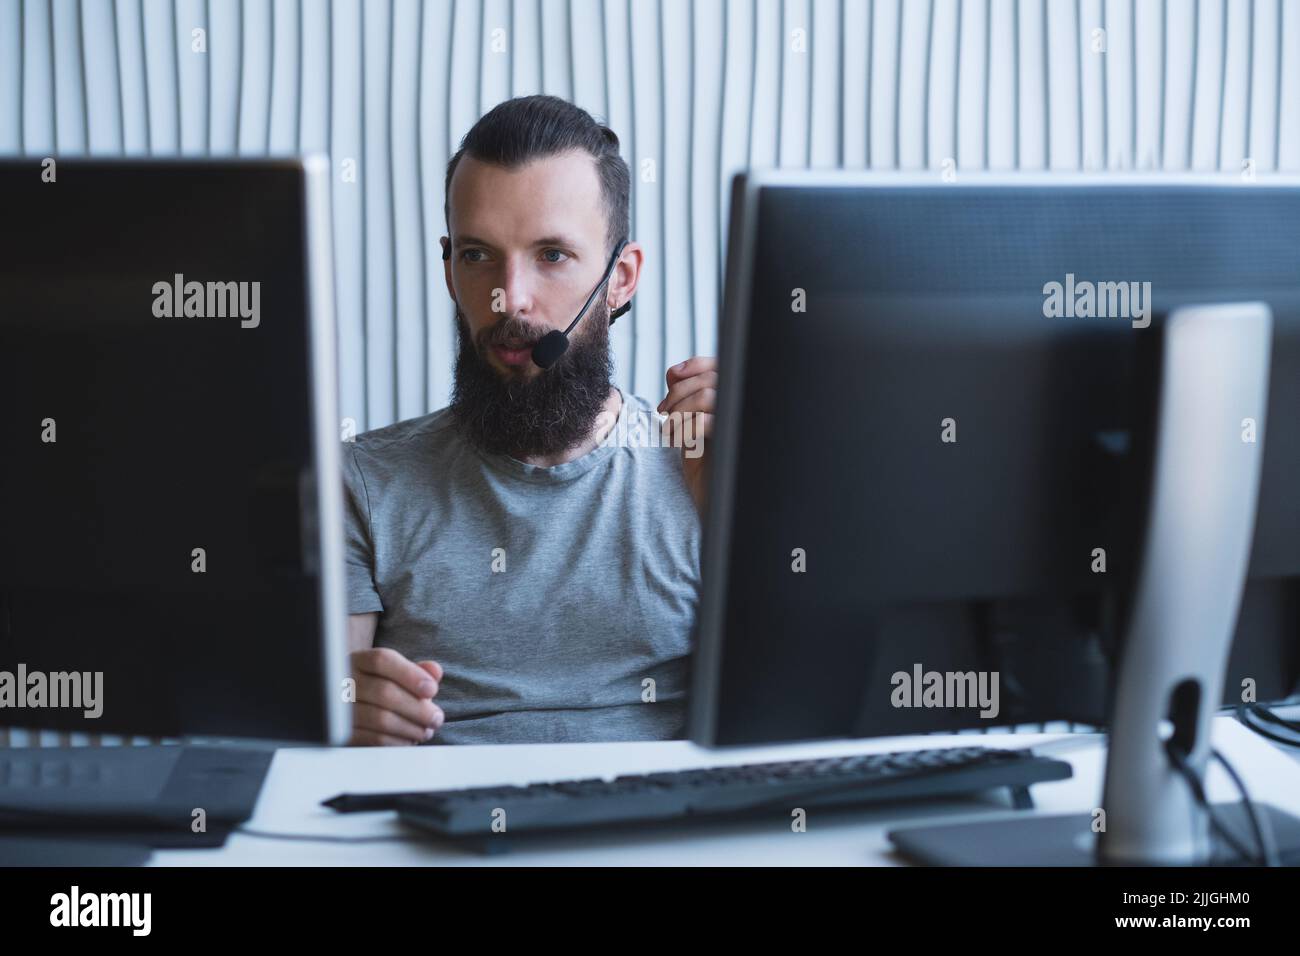 tech support software engineer customer office Stock Photo